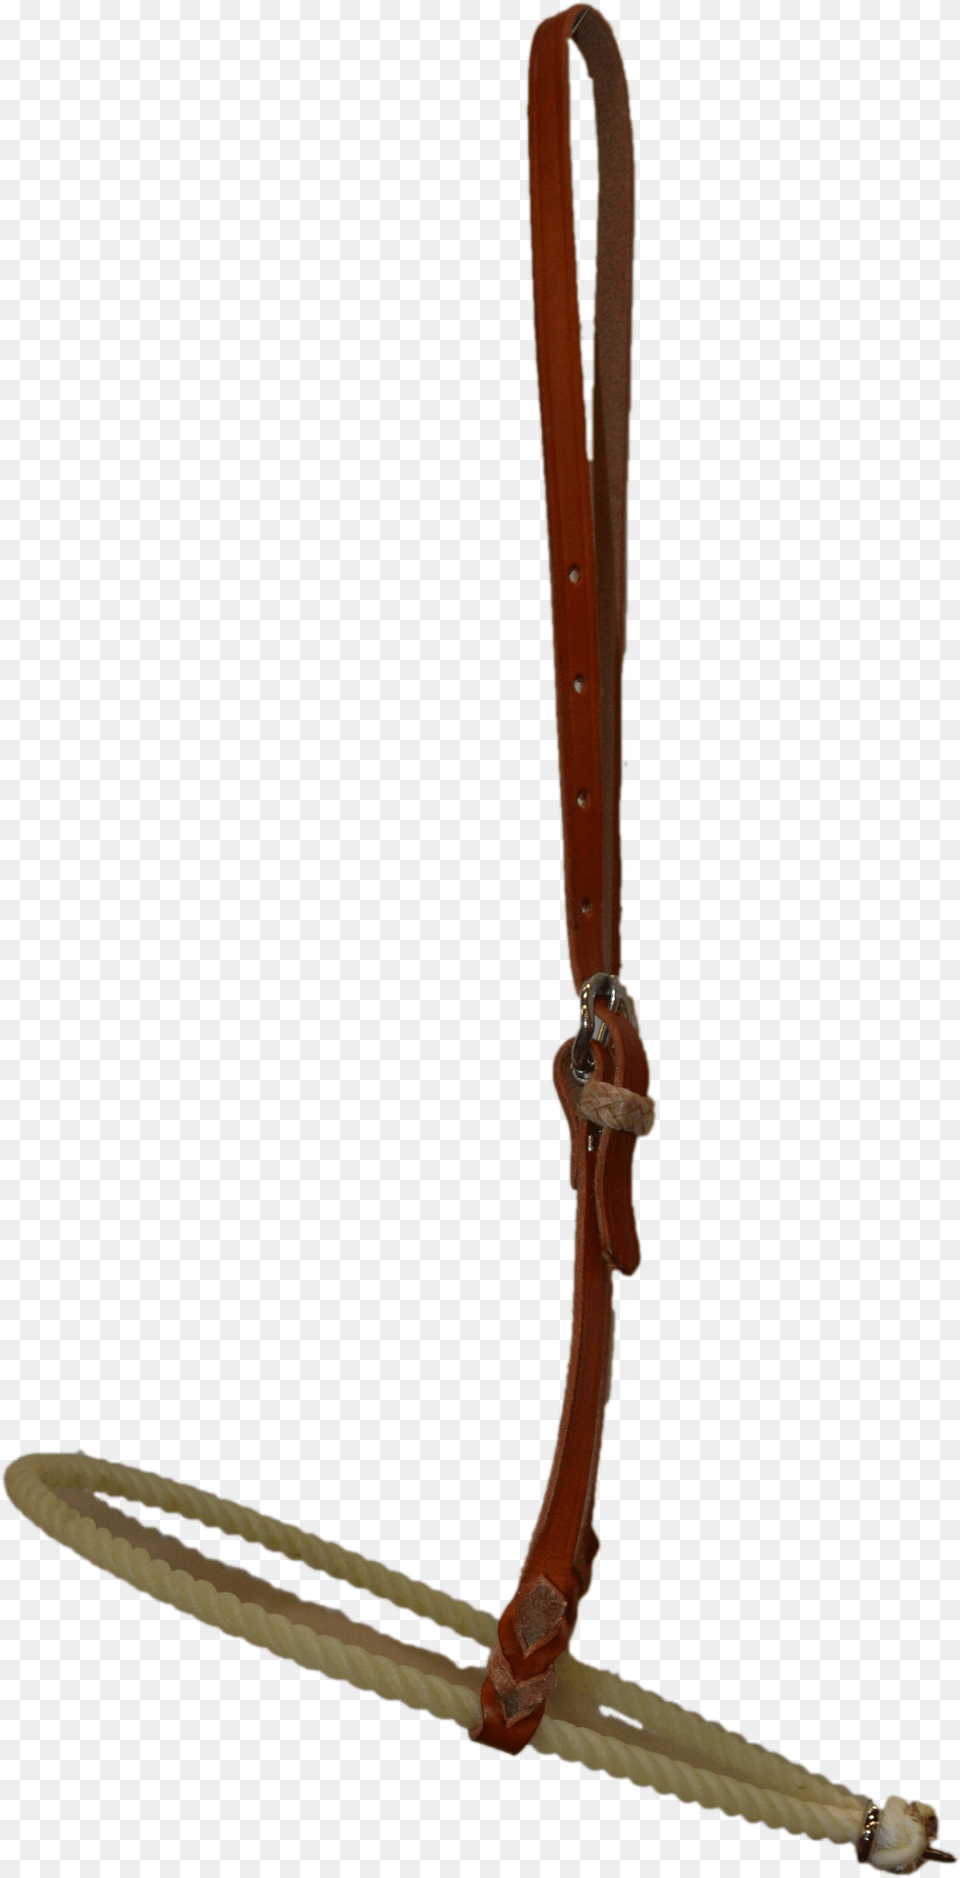 E 2010 Elite Single Rope Noseband Harness Strap Rifle, Halter, Accessories Free Png Download